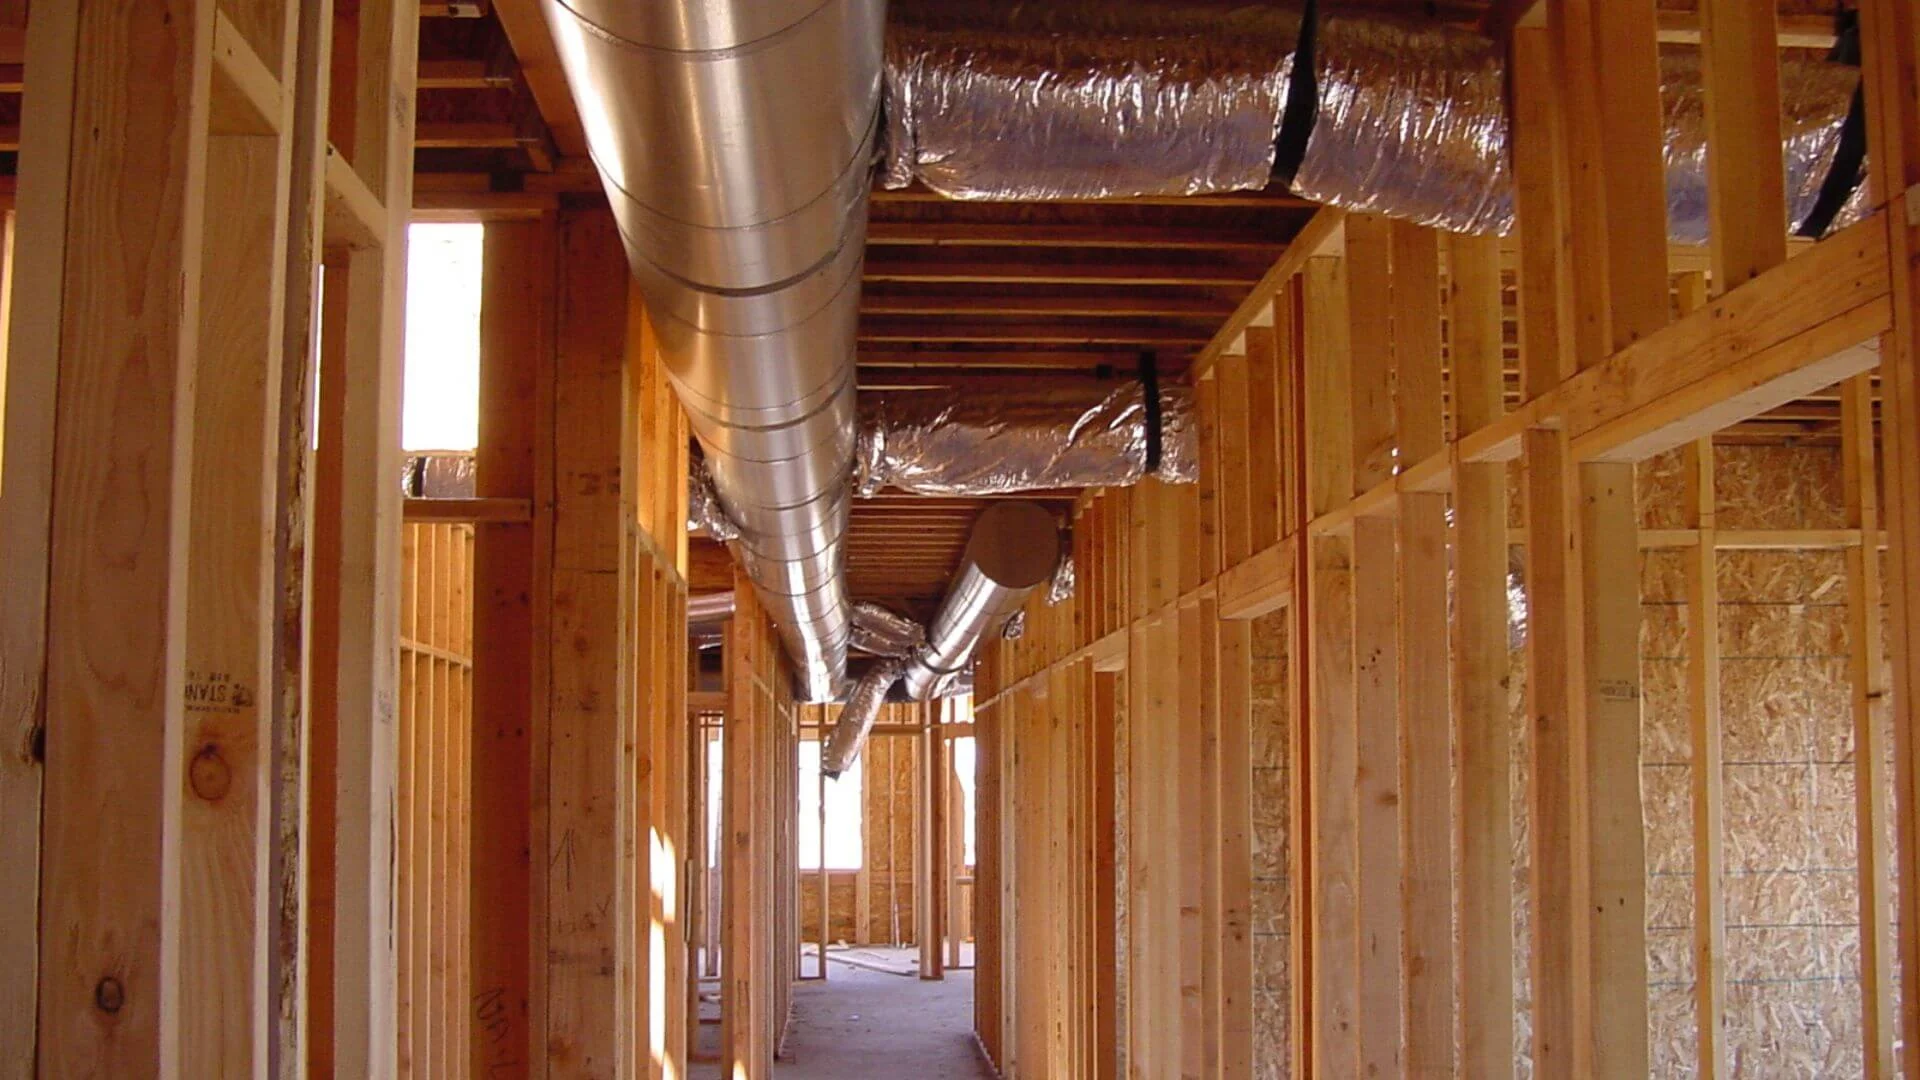 Overview-Of-Hvac-Ductwork-From-Topcare-Hvac-in-Burlington